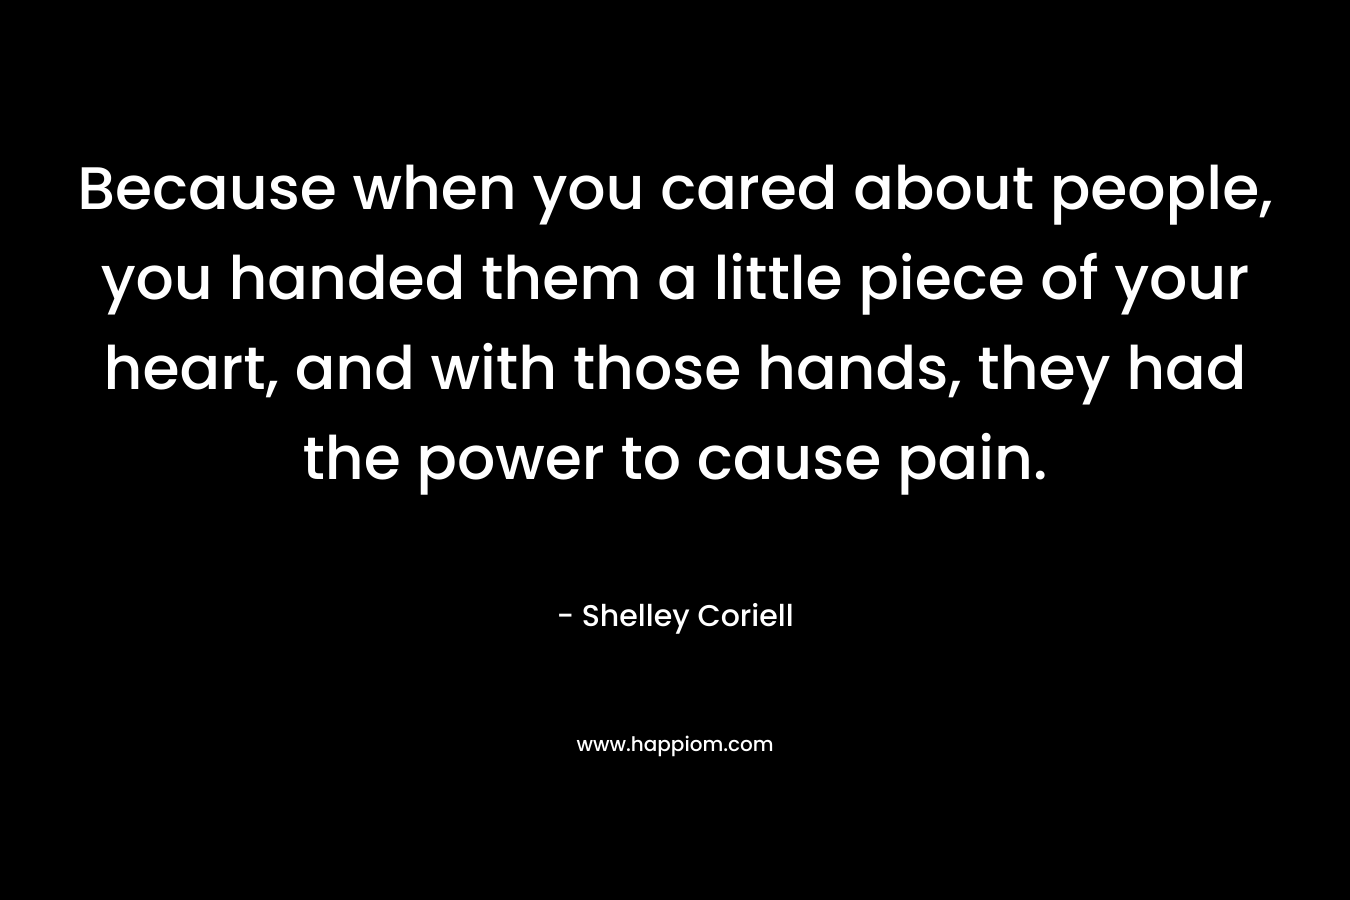 Because when you cared about people, you handed them a little piece of your heart, and with those hands, they had the power to cause pain. – Shelley Coriell